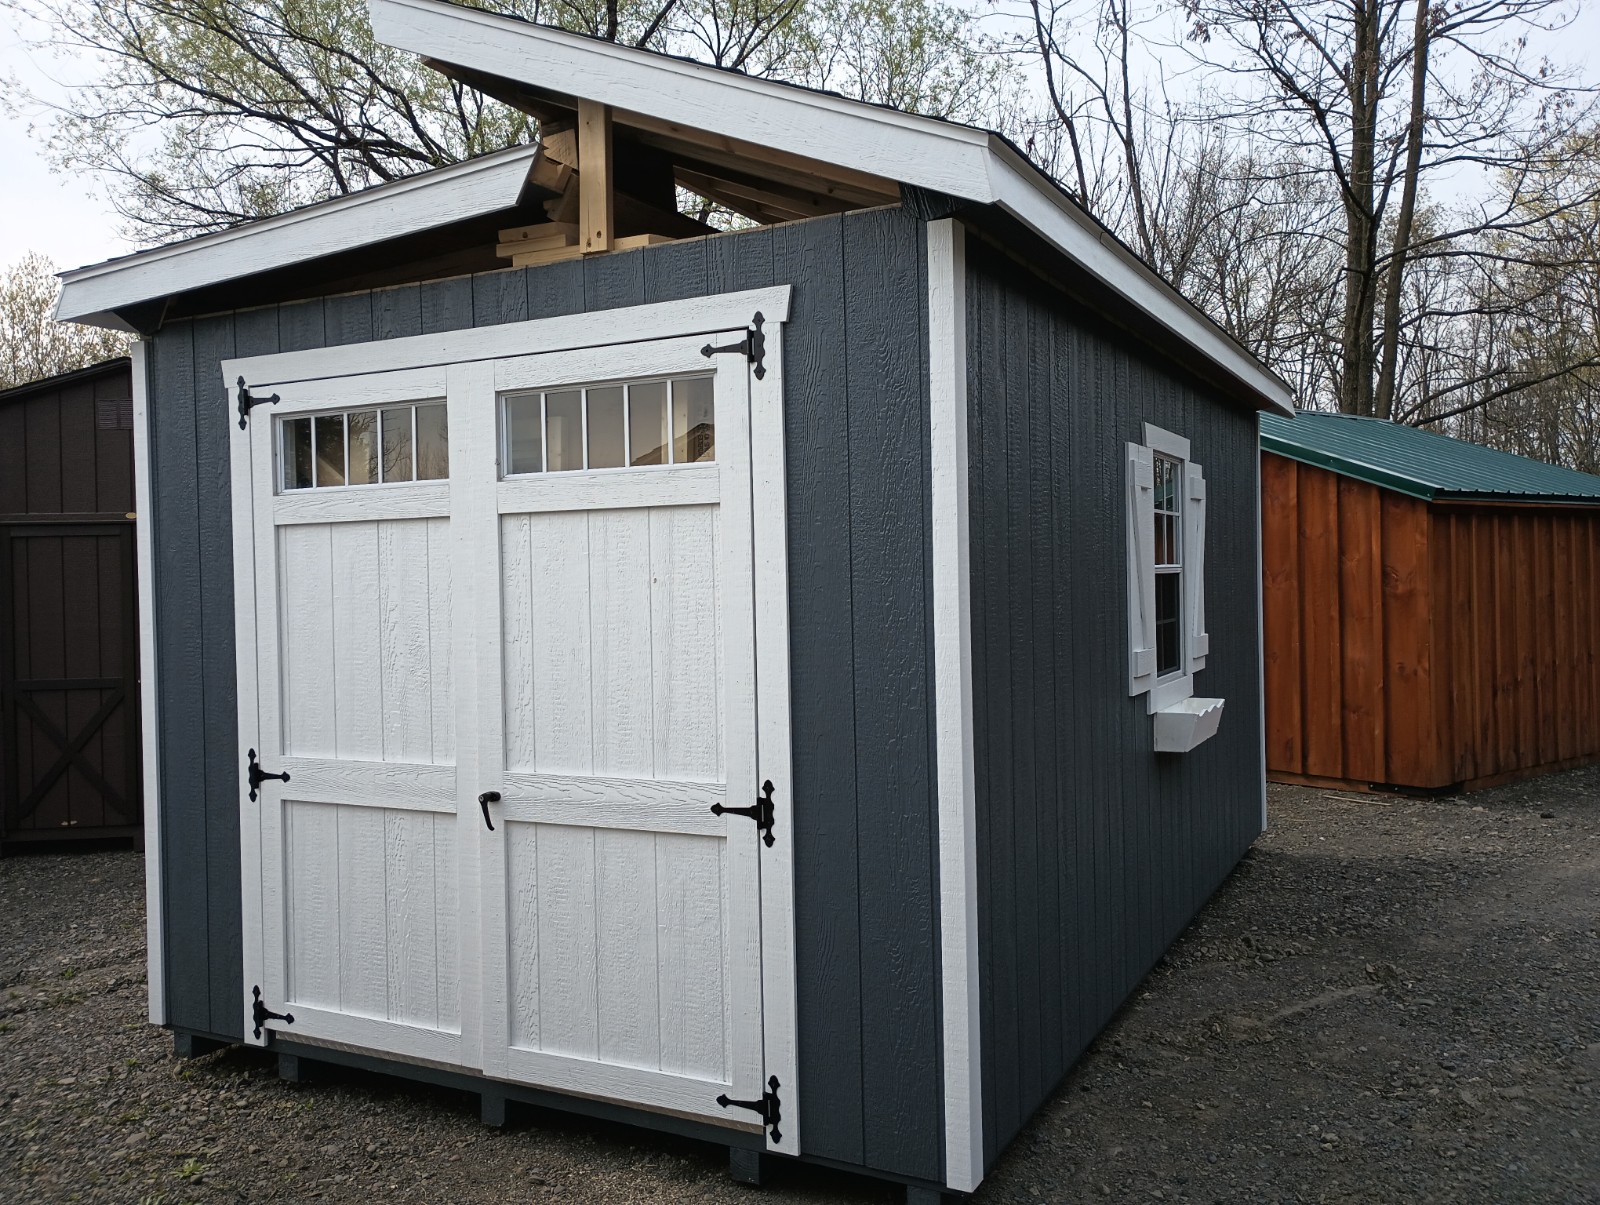 Blue Hinged Roof Shed with Double Doors and Windows